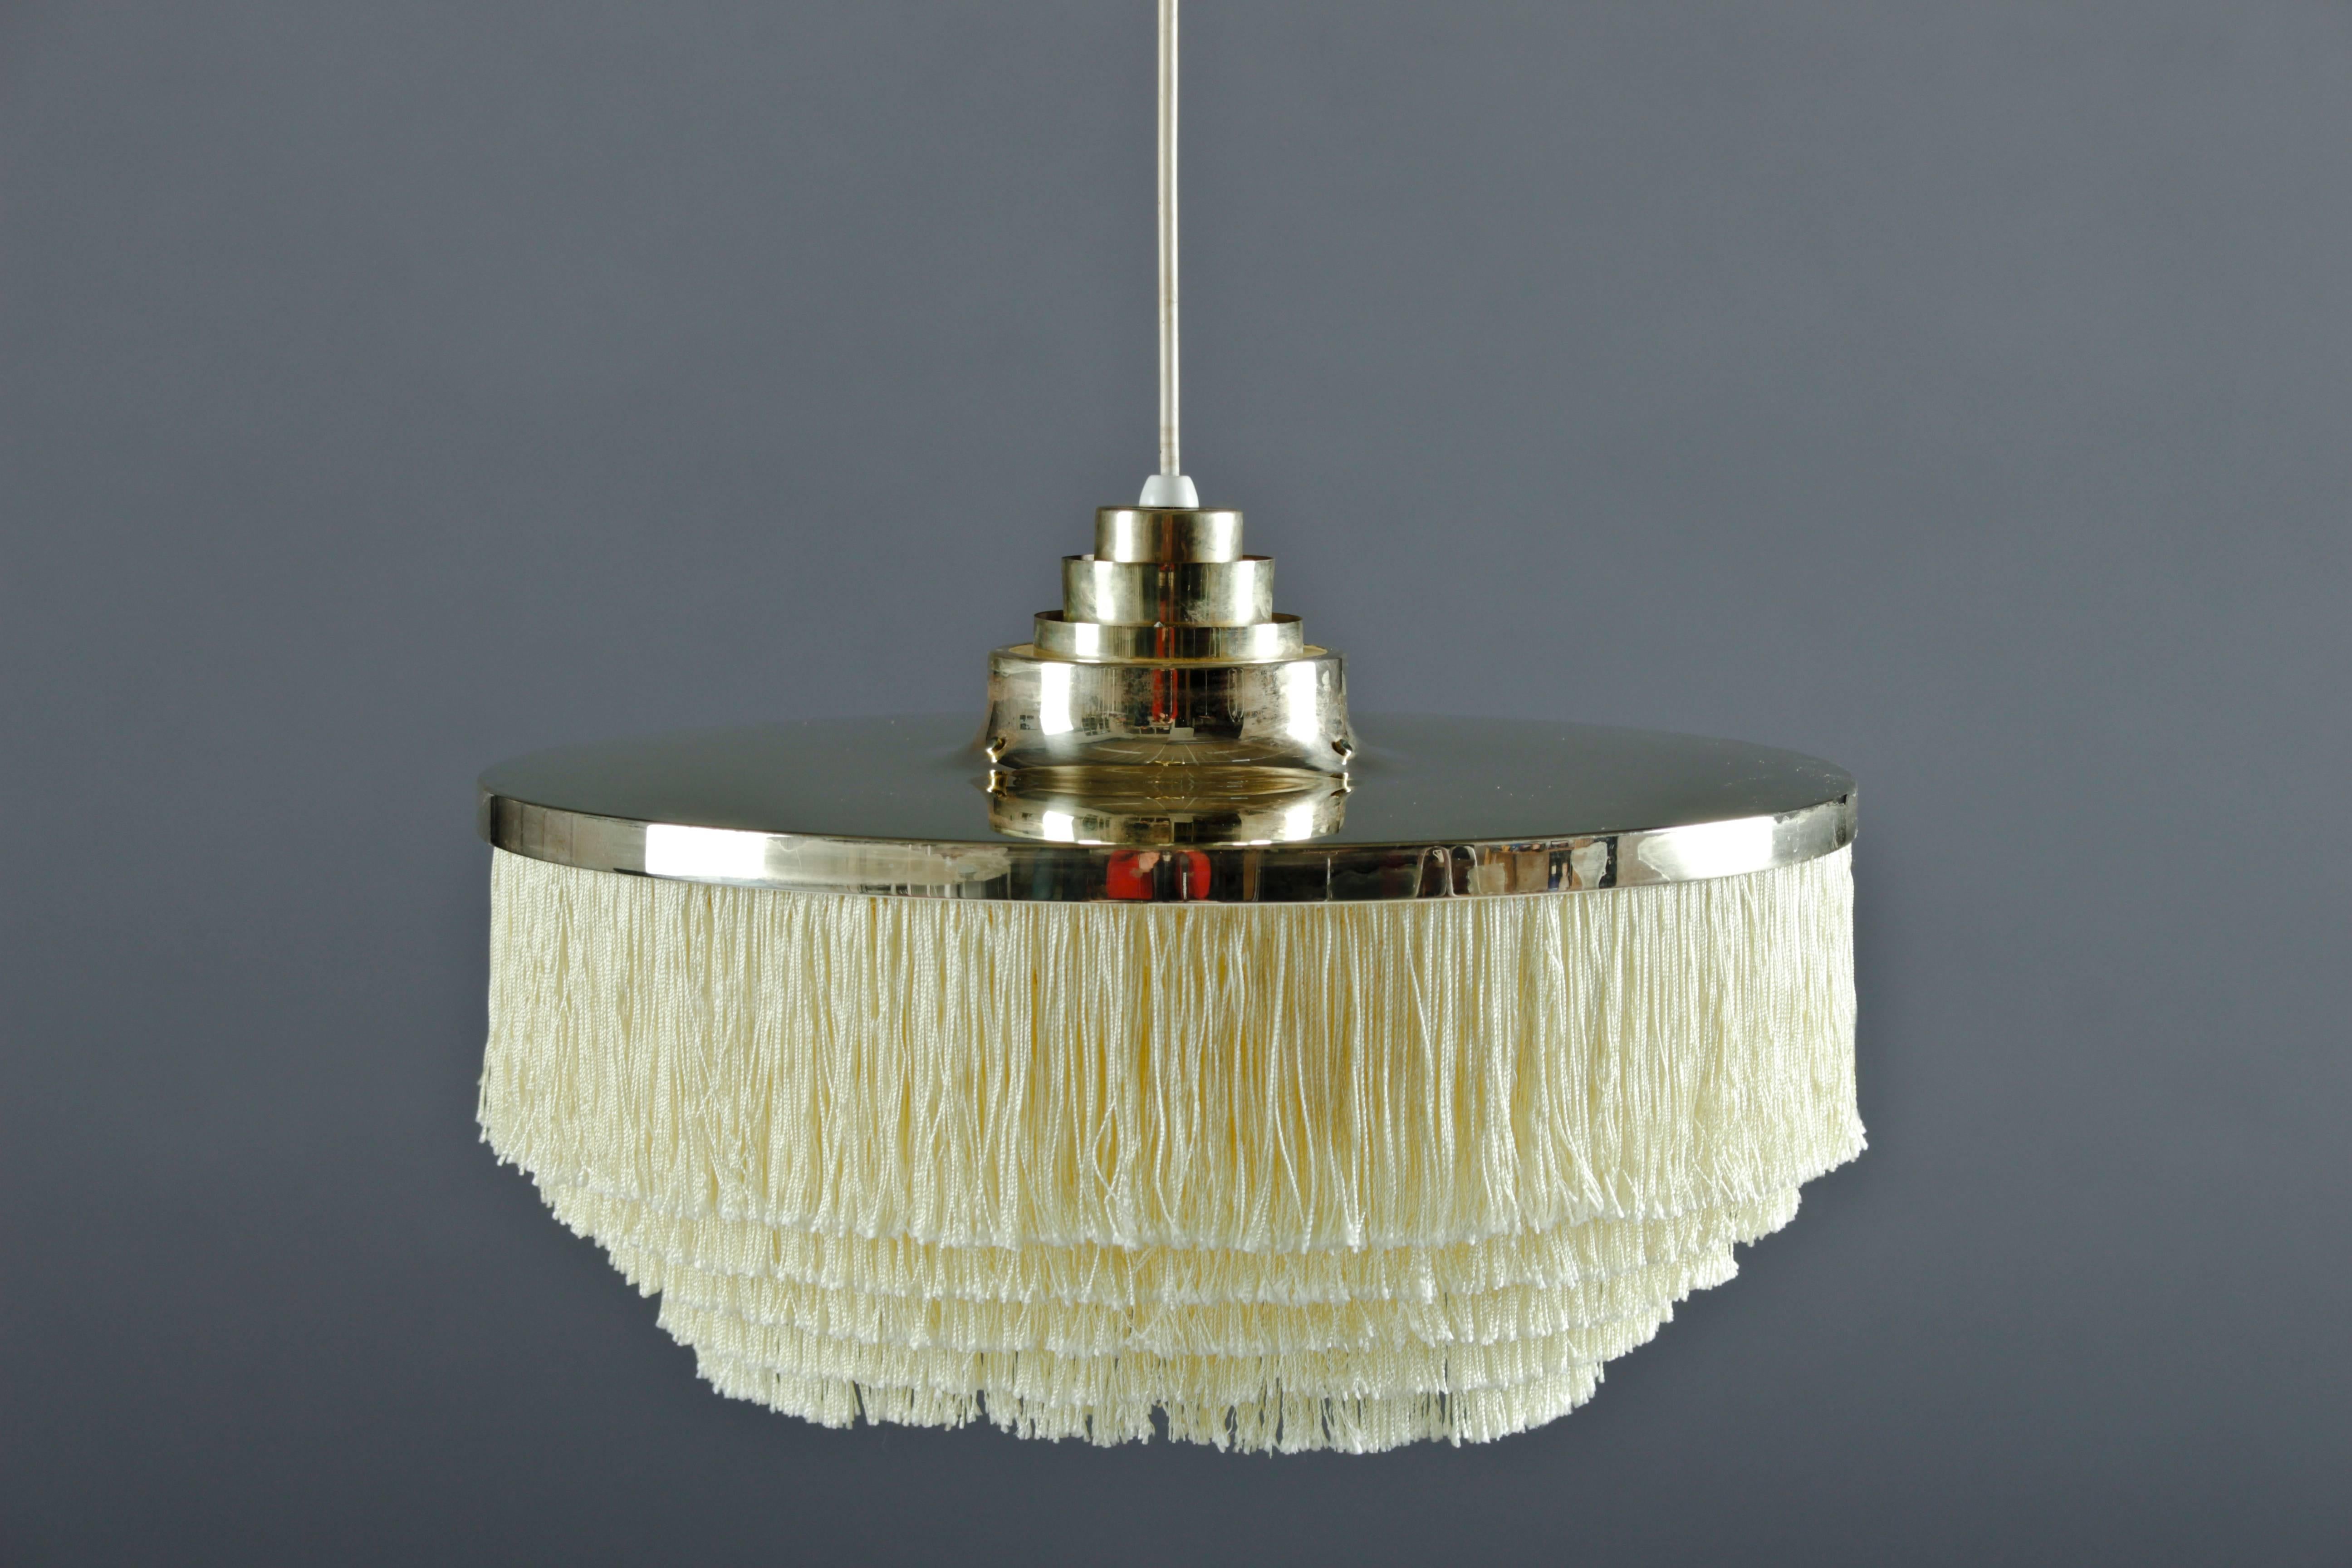 Ceiling light with brass frame and baby yellow silk fringes, by Hans-Agne Jakobsson for Markaryd in Sweden. The lamp is in very good condition, with only small signs of age and use. The brass parts can be polished by us to brand new look if wanted.